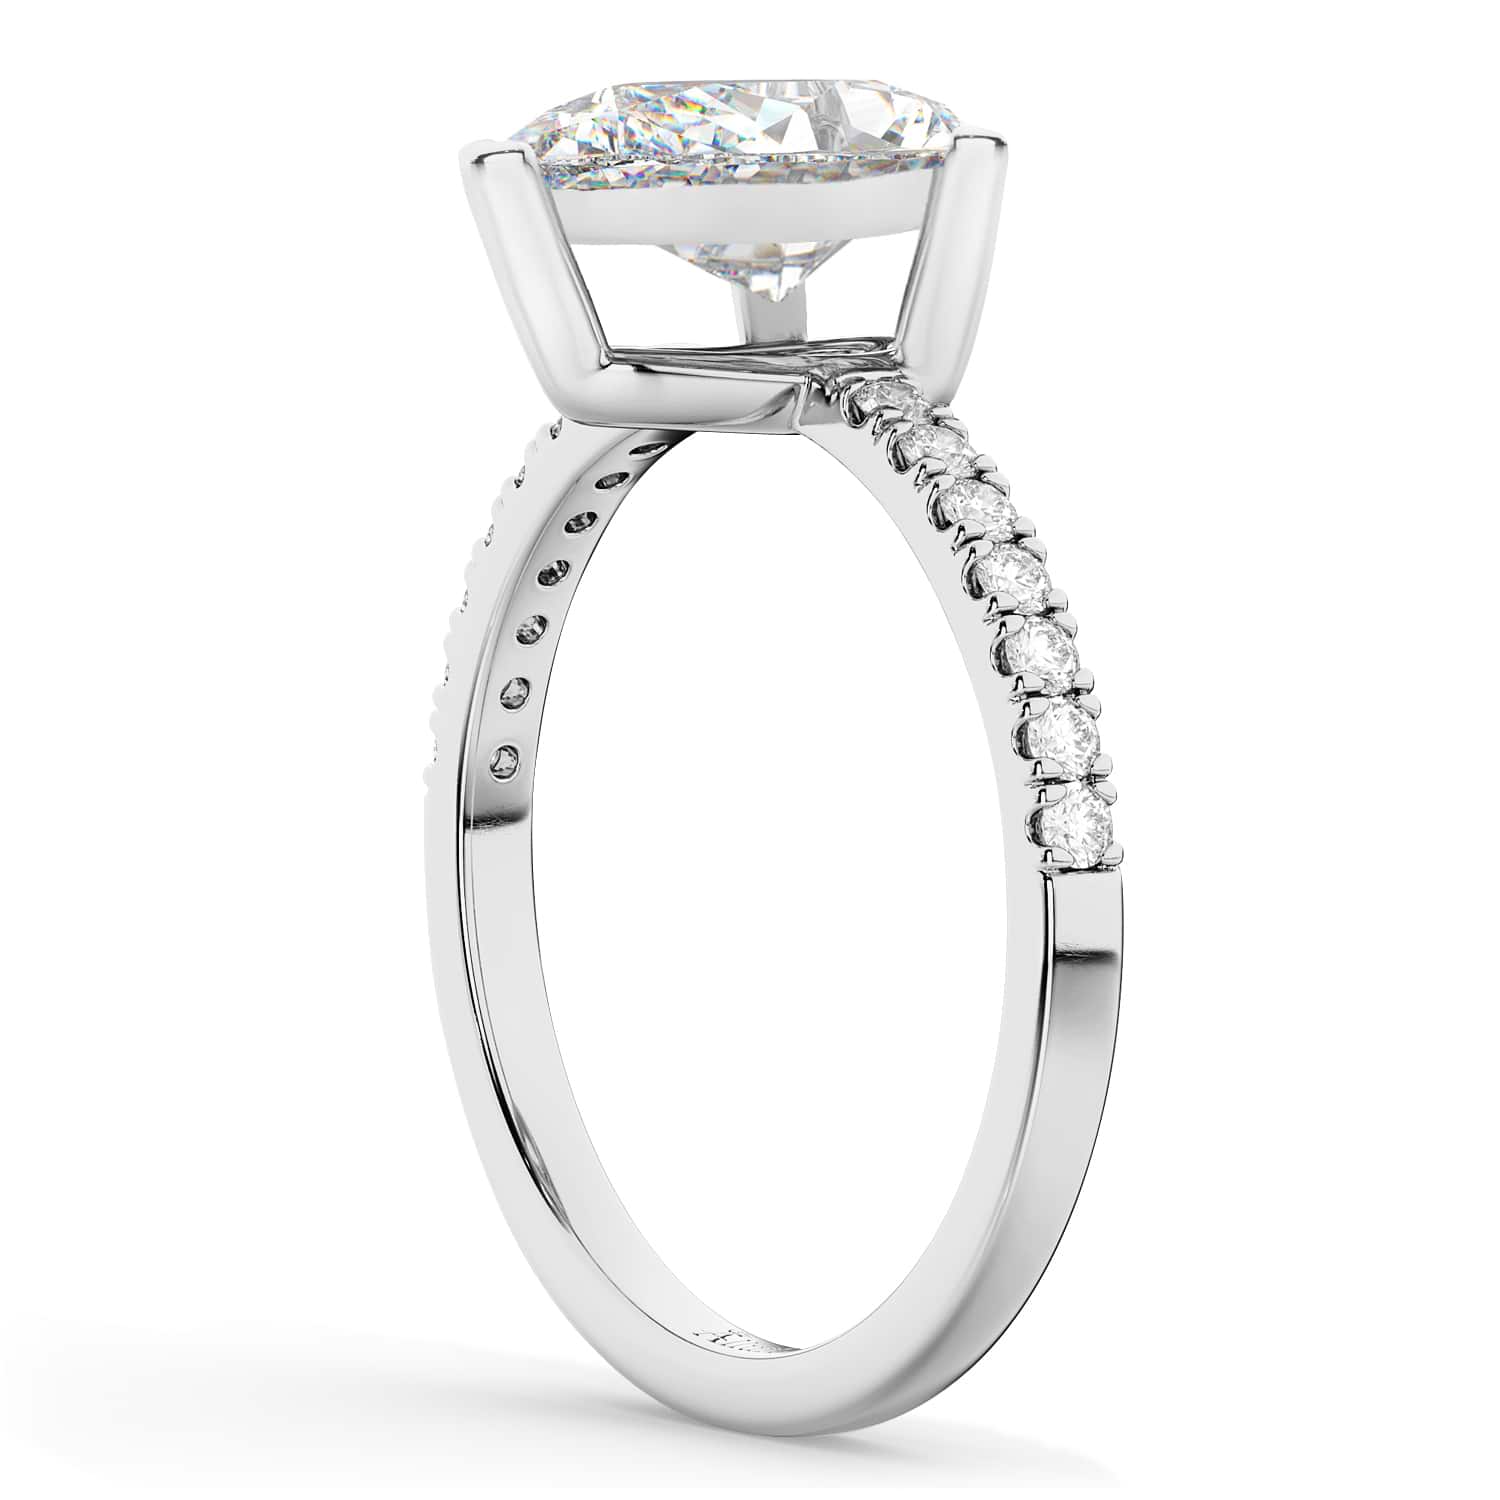 Pear Cut Sidestone Accented Moissanite & Diamond Engagement Ring 14K White Gold 2.14ct